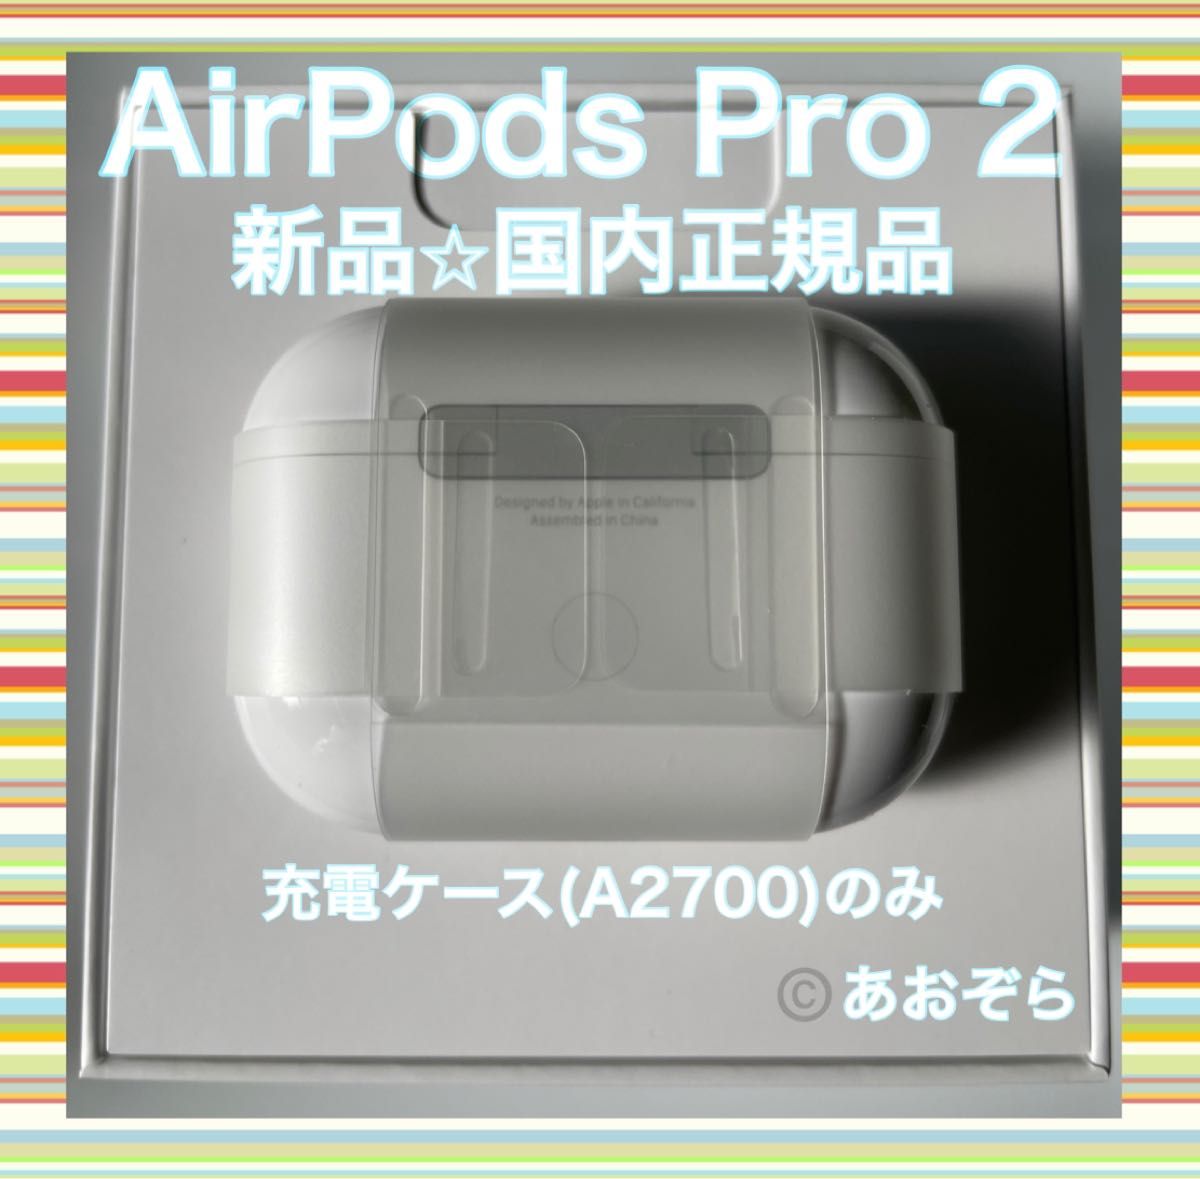 AirPods Pro 2 (A2700) 充電ケース 新品・正規品｜PayPayフリマ